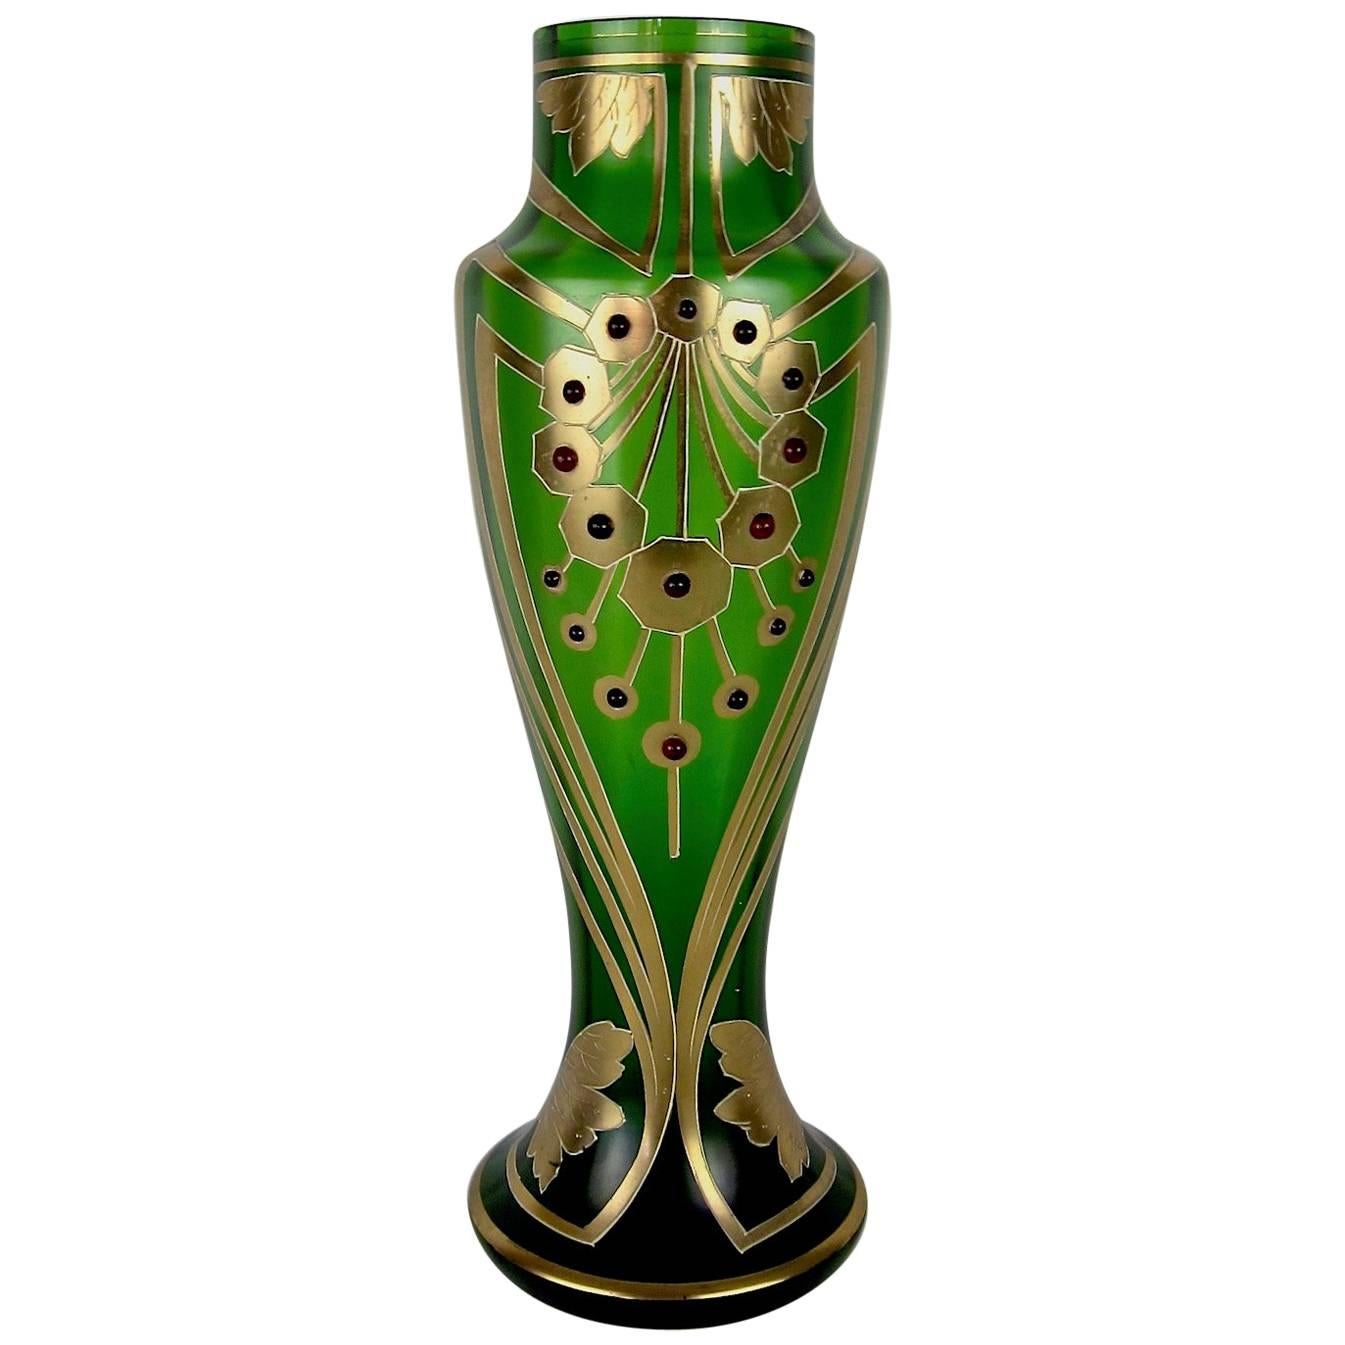 Antique Jeweled and Enameled Secessionist Green and Gold Glass Vase 